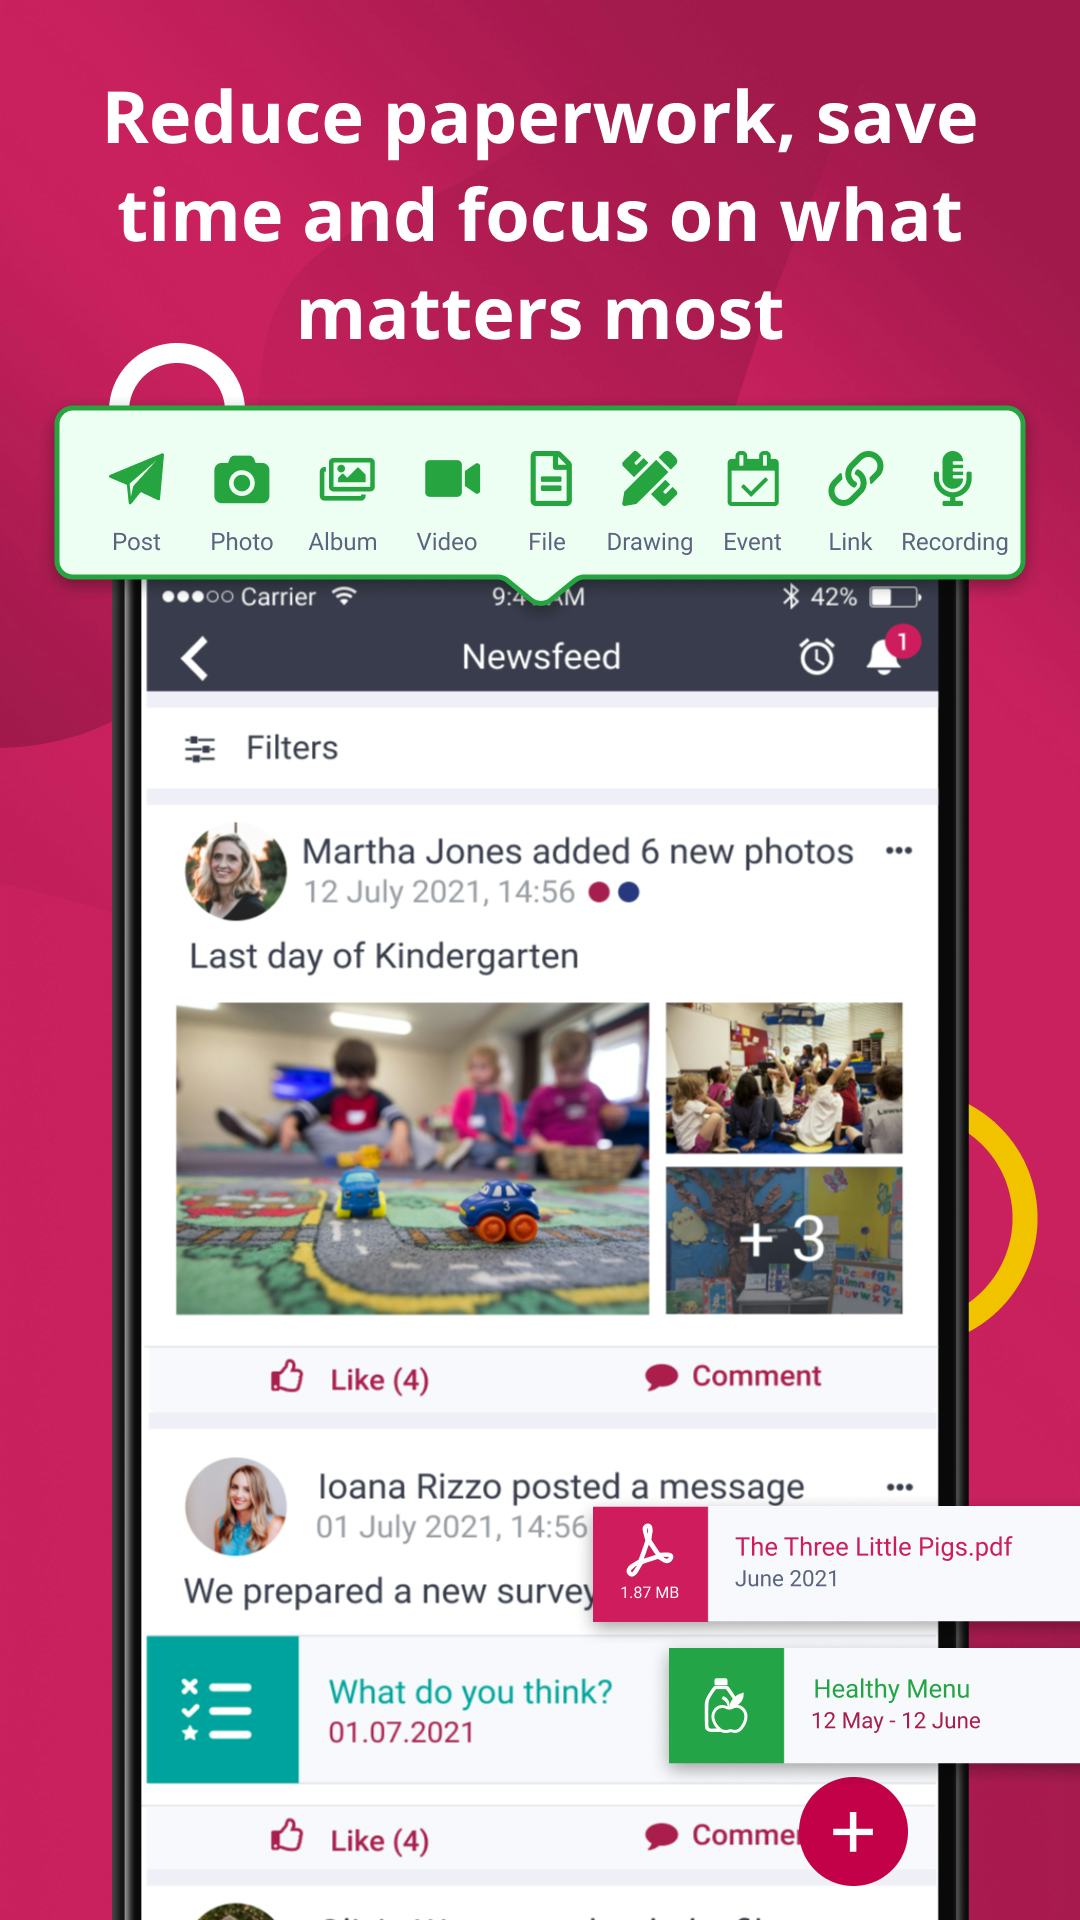 KINDERPEDIA Software - The newsfeed of the Kinderpedia app is an infinite scroll through the activities, updates and resources of a classroom or even school. The posts can be filtered, for easy access and teachers can add now info with the tap of one button.